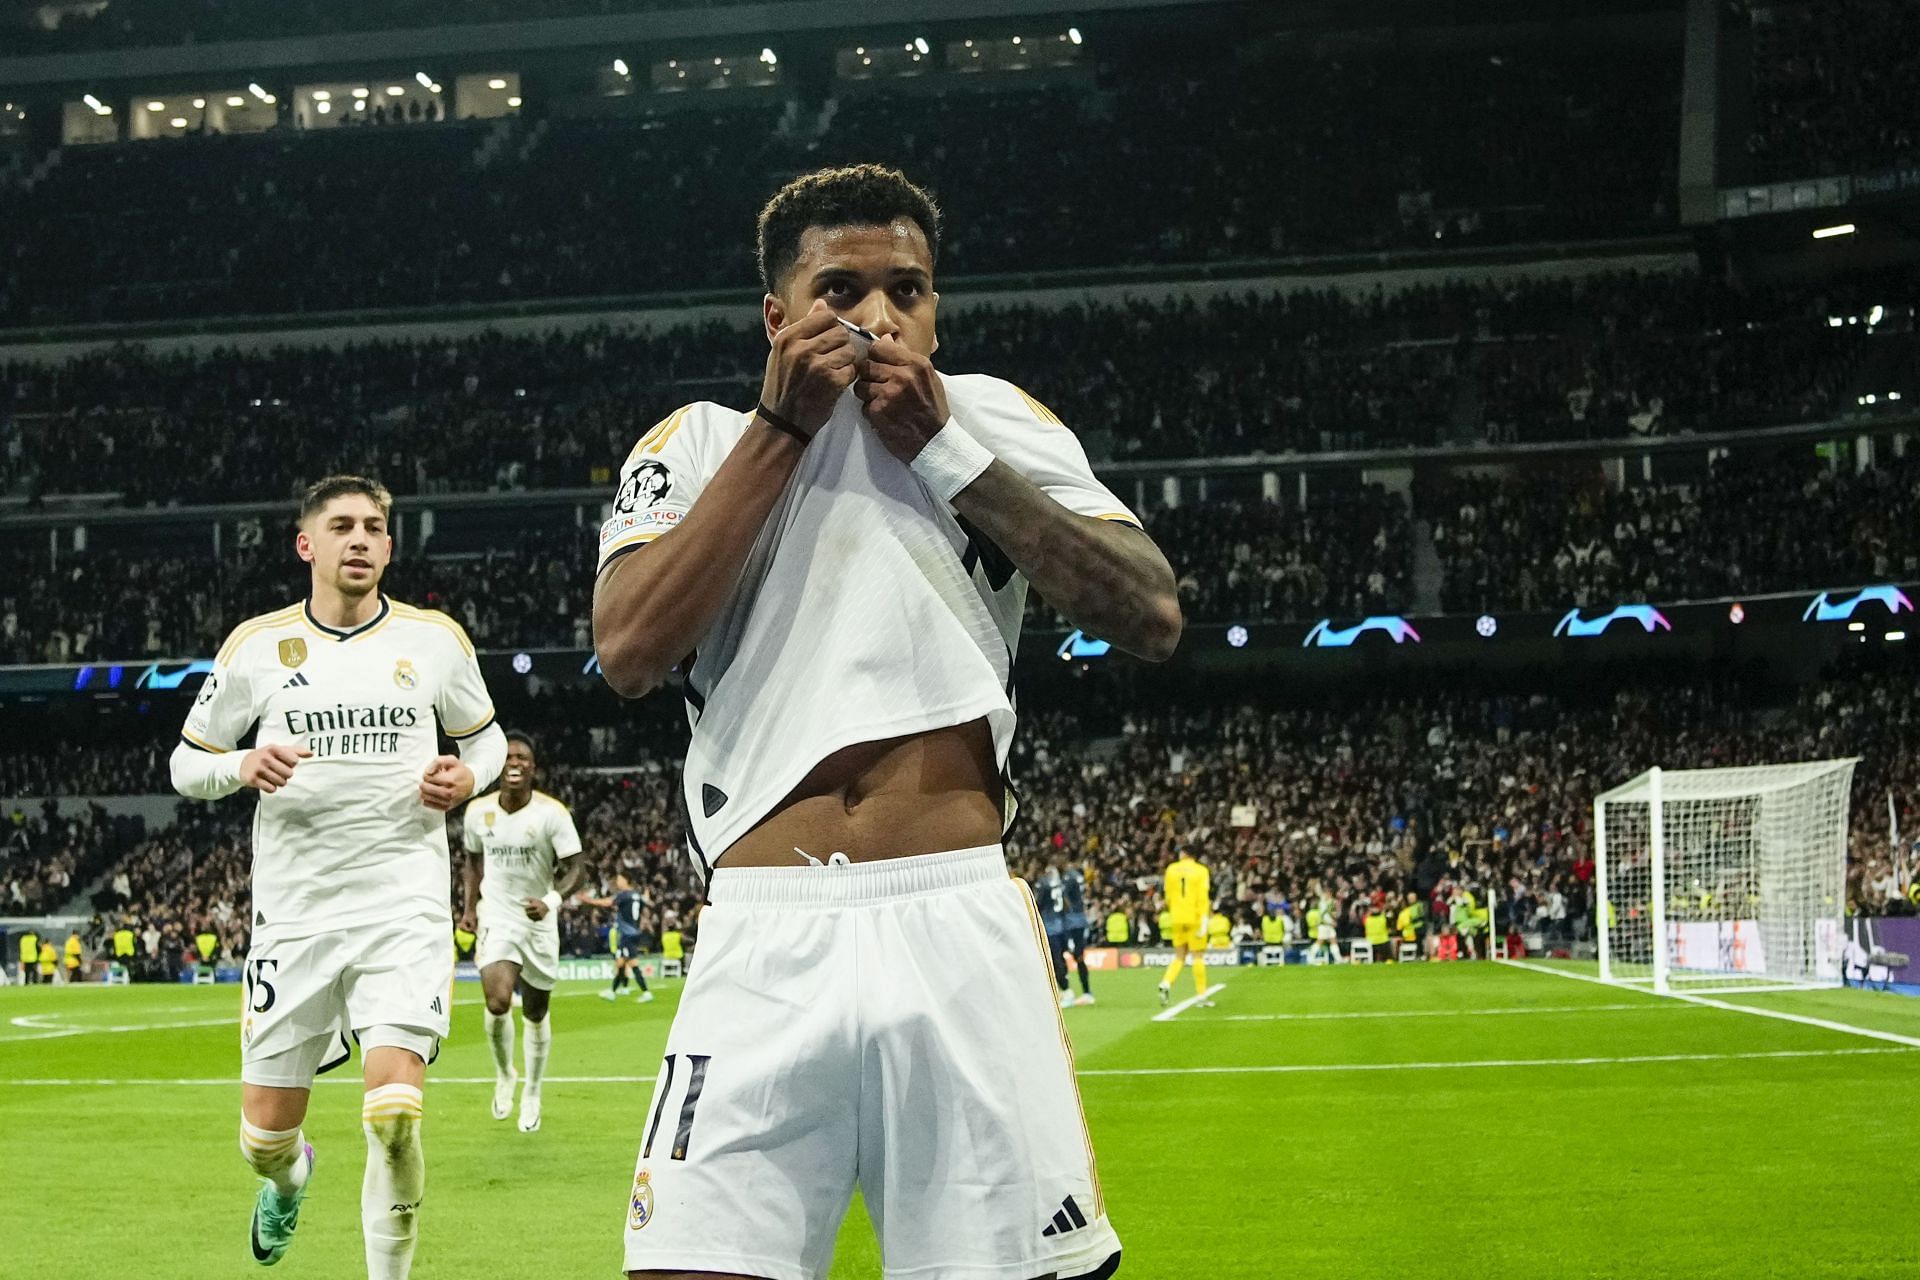 Rodrygo Goes was one of the scorers for Los Blancos.